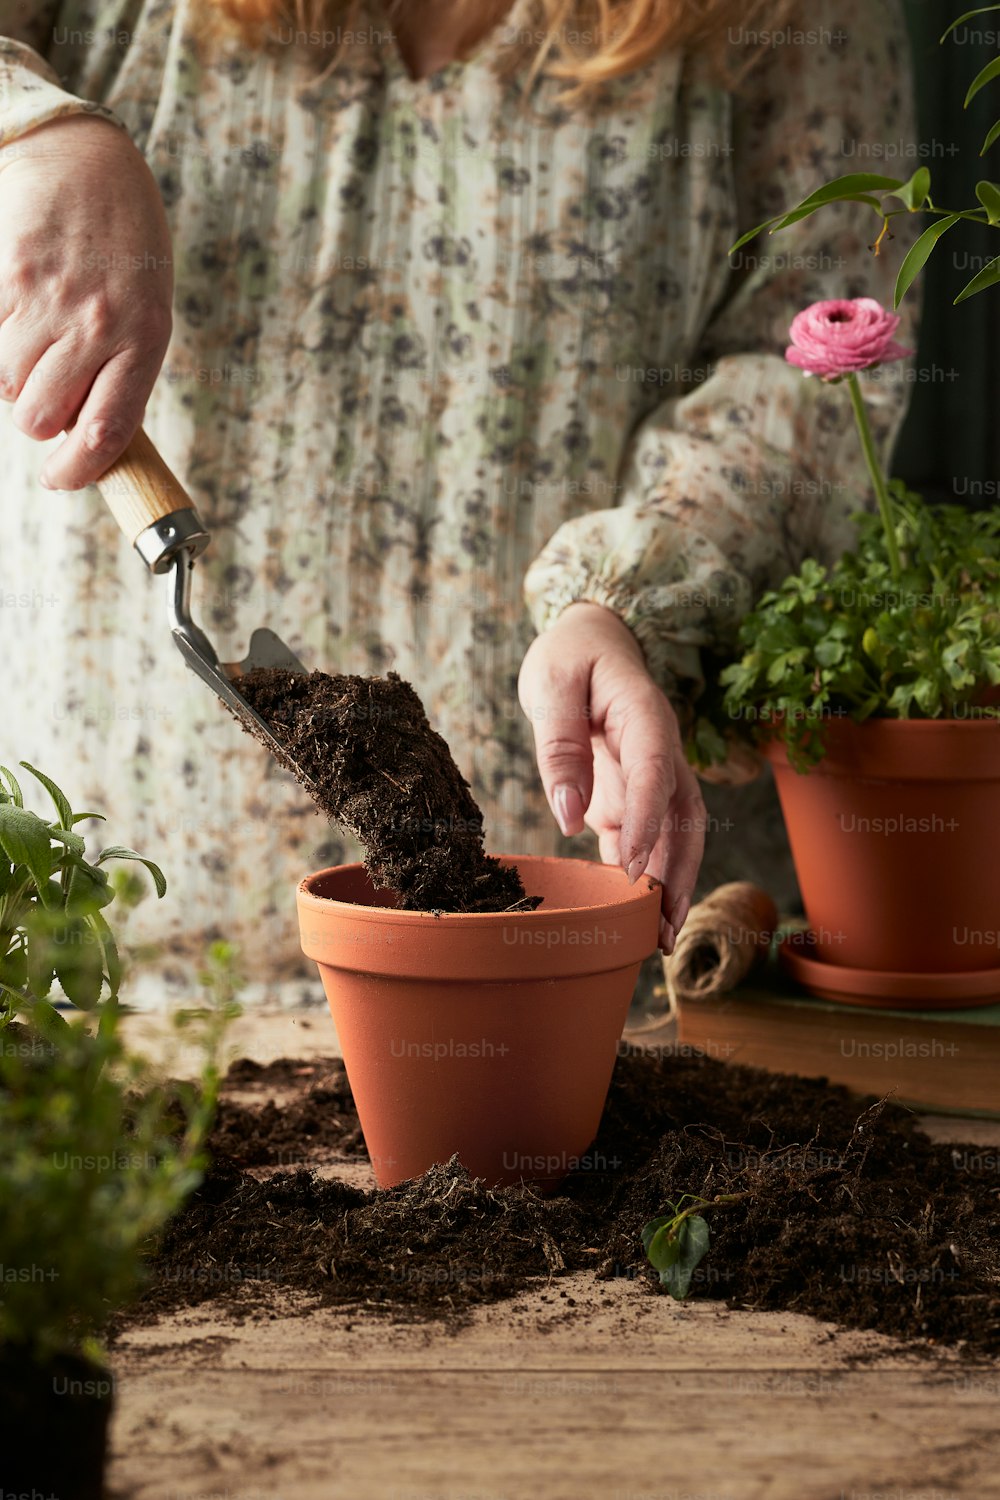 a woman is shoveling dirt into a potted plant